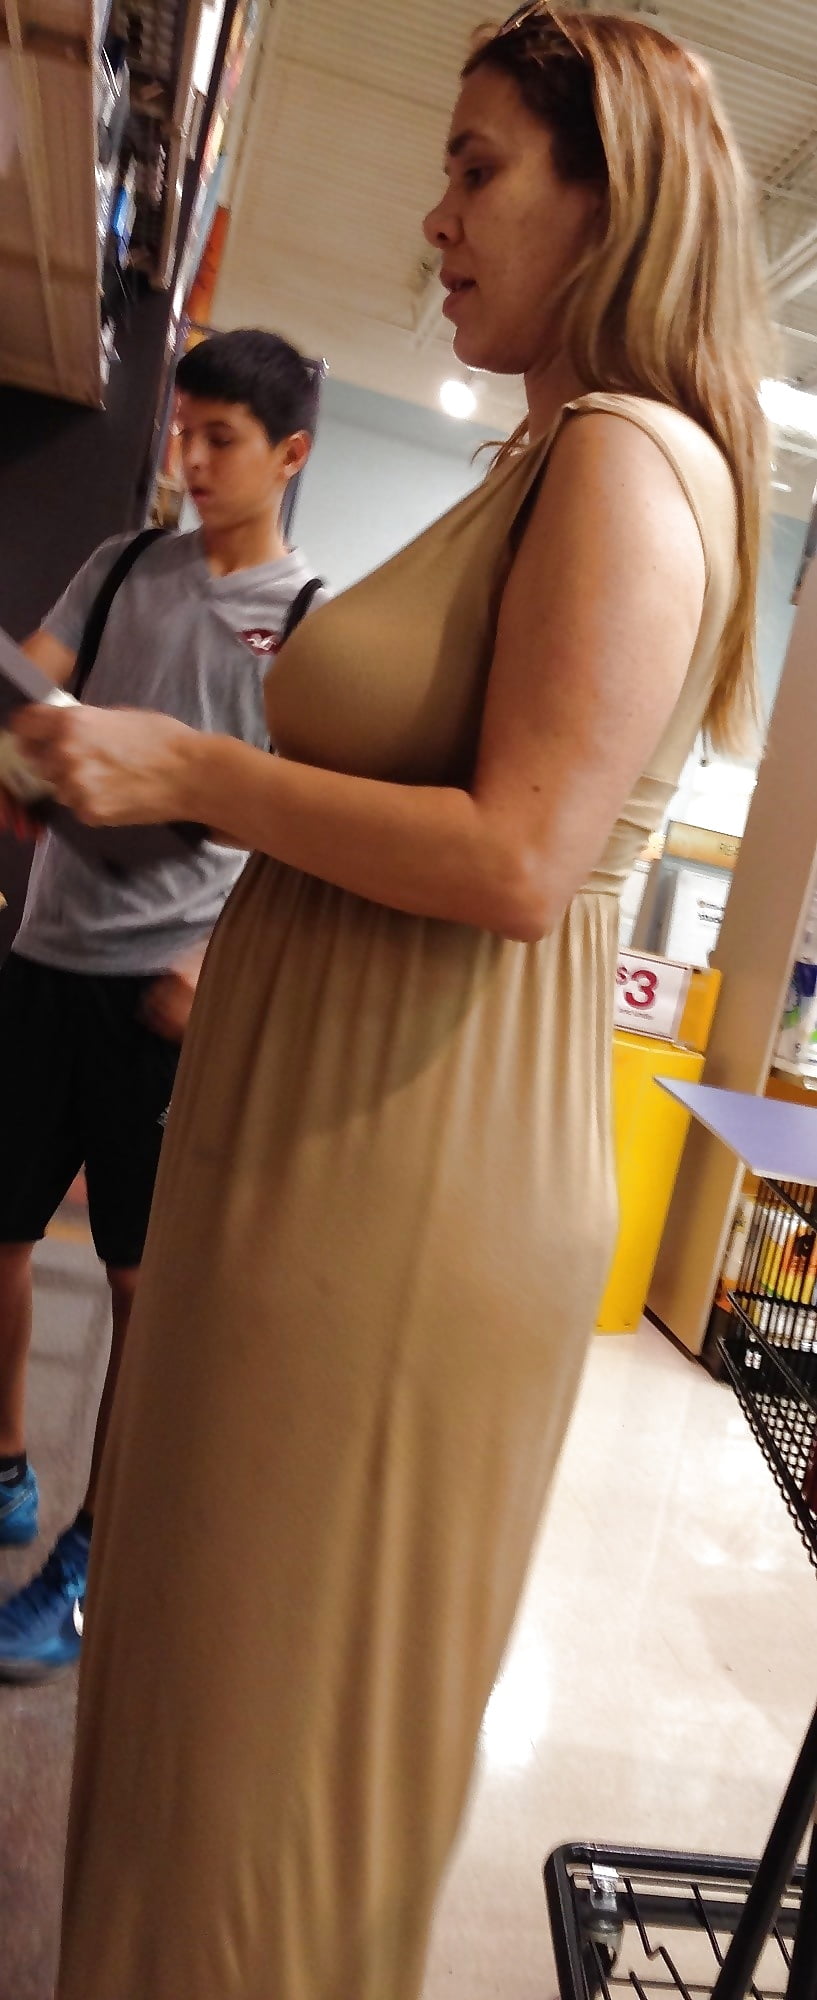 Candid busty Latina milf with pokies shopping porn gallery